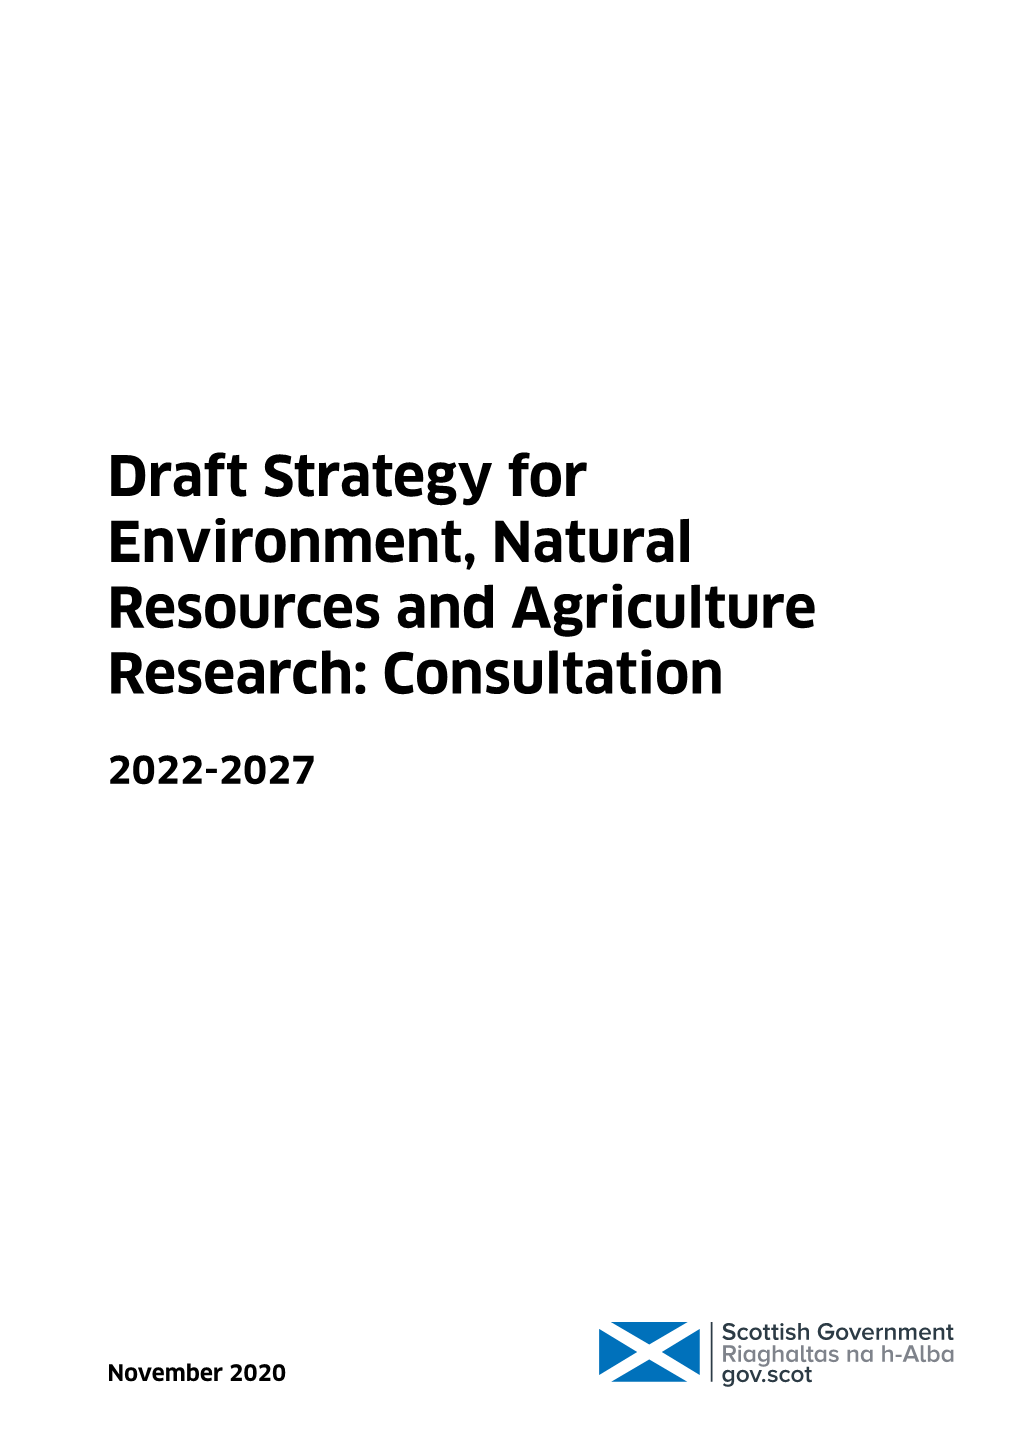 Draft Strategy for Environment, Natural Resources and Agriculture Research: Consultation